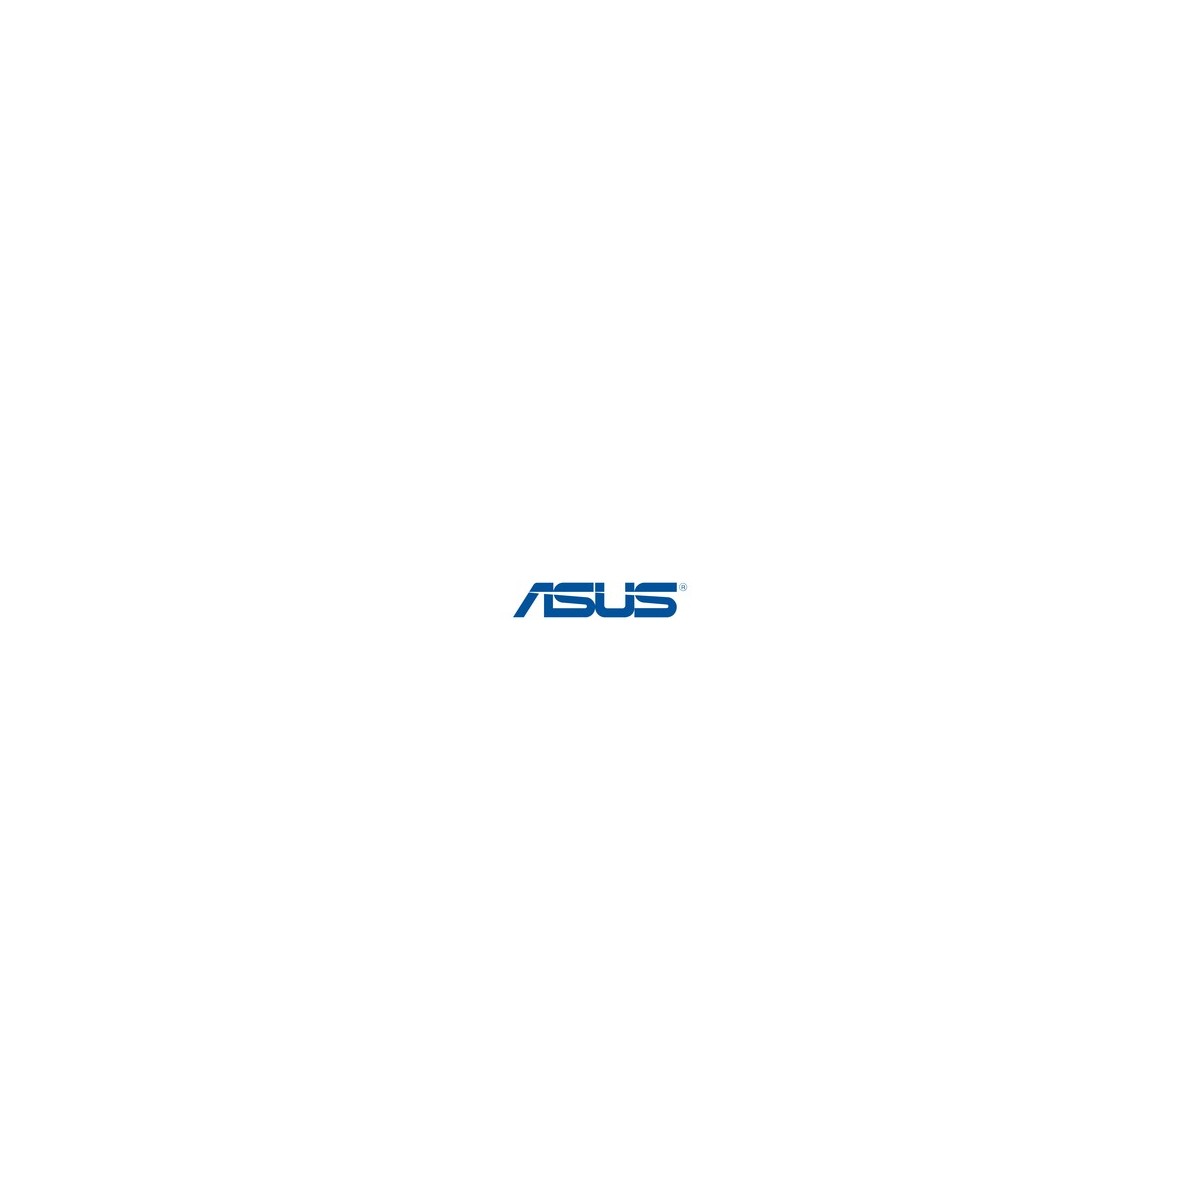 ASUS 18010-17322700 - Display - 43.9 cm (17.3) - Full HD - ASUS - - FX705DY - FX705GD - FX705GE - FX705GM